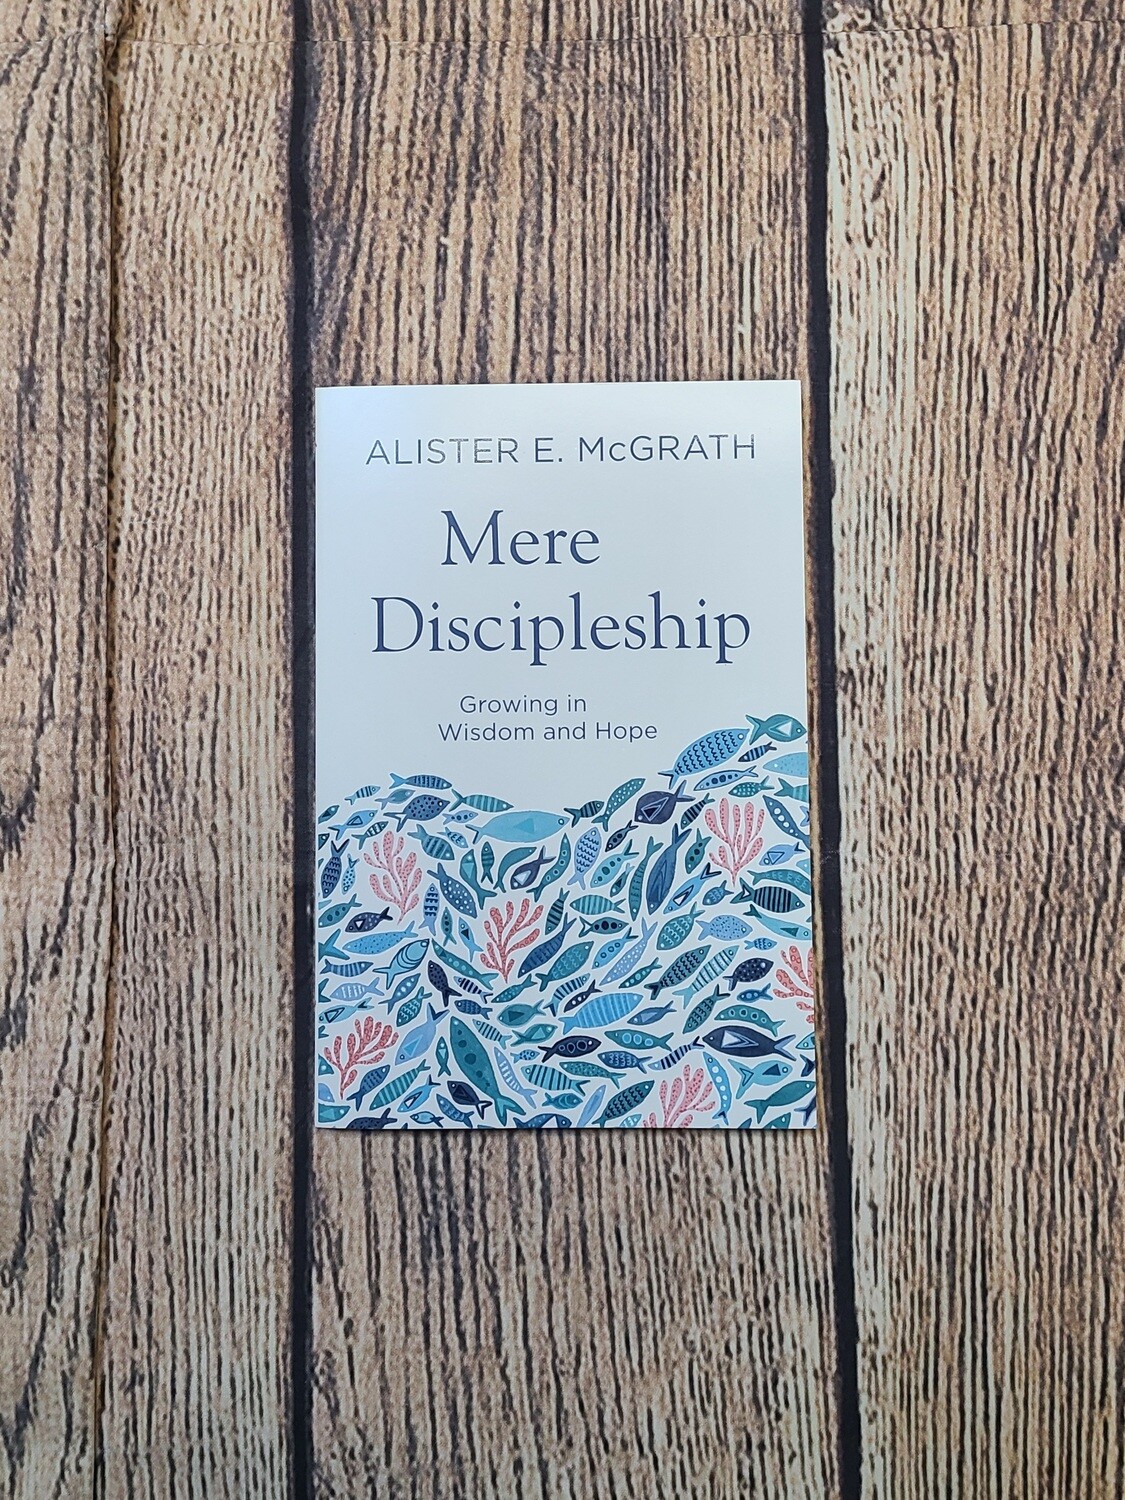 Mere Discipleship: Growing in Wisdom and Hope by Alister E. McGrath